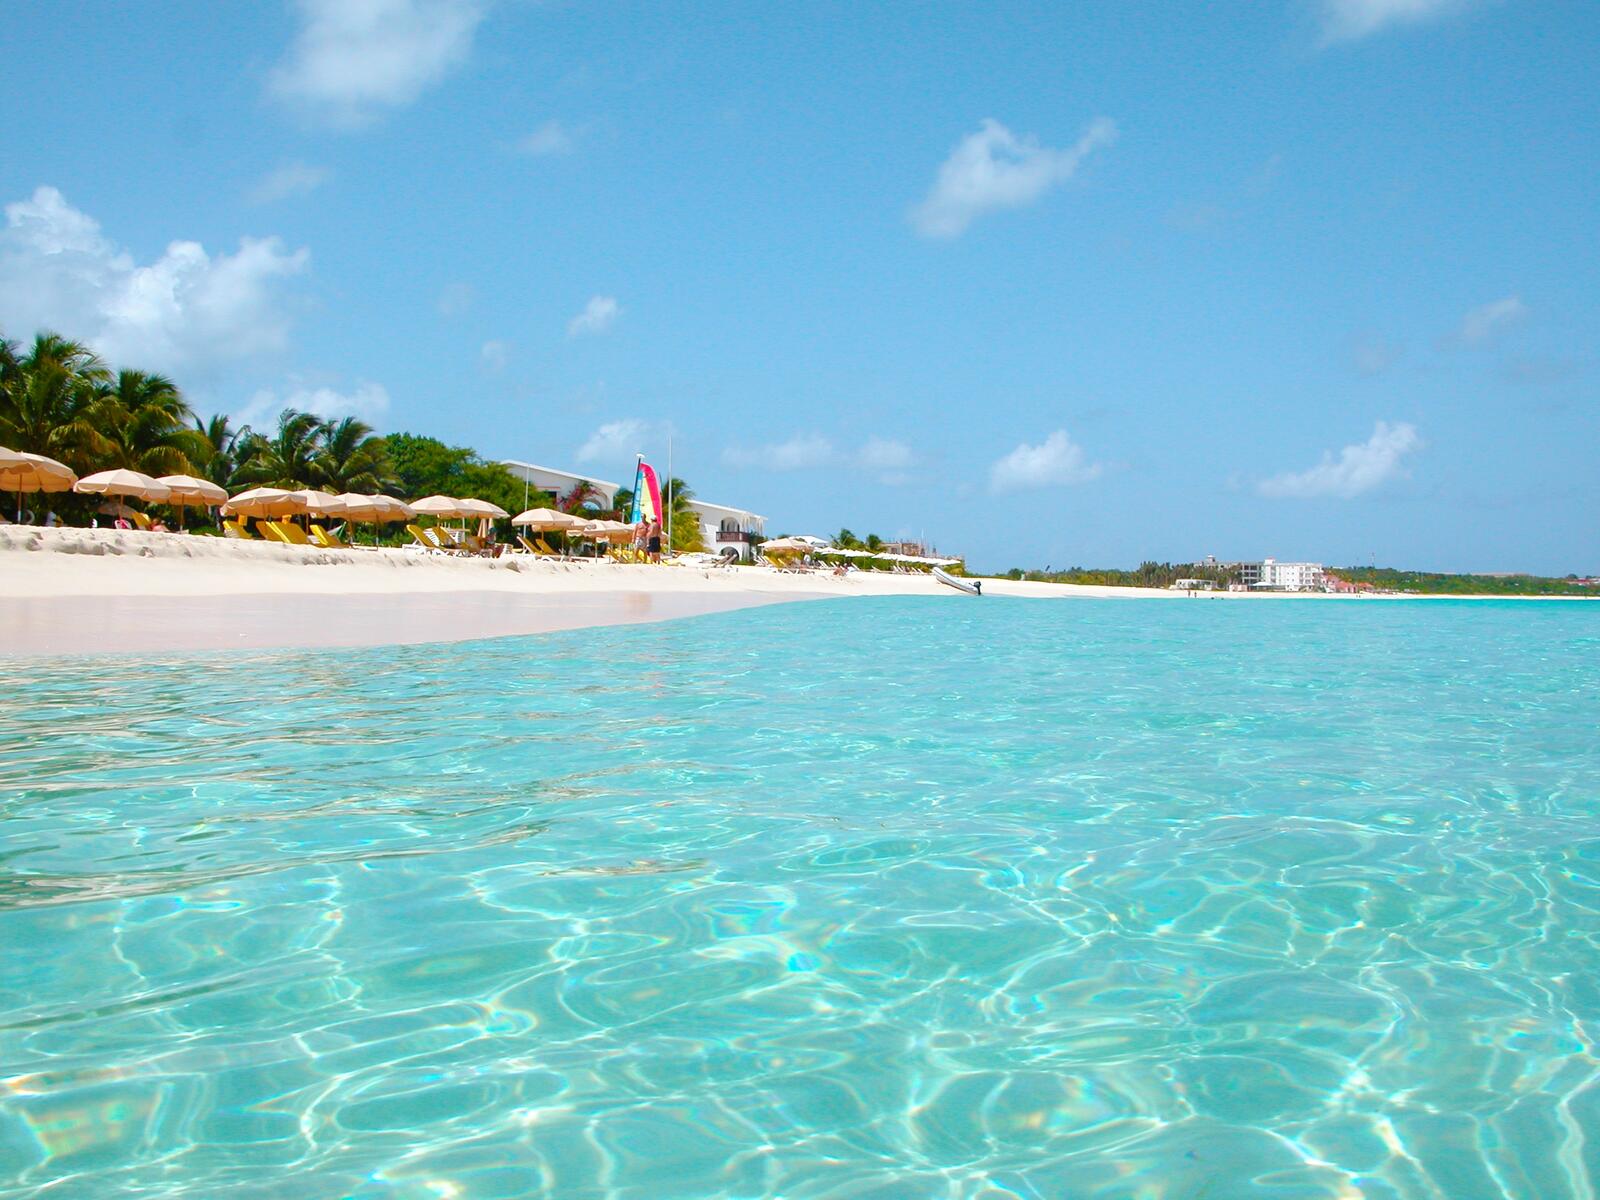 Free photo Desktop picture of Caribbean sandy shore with blue water